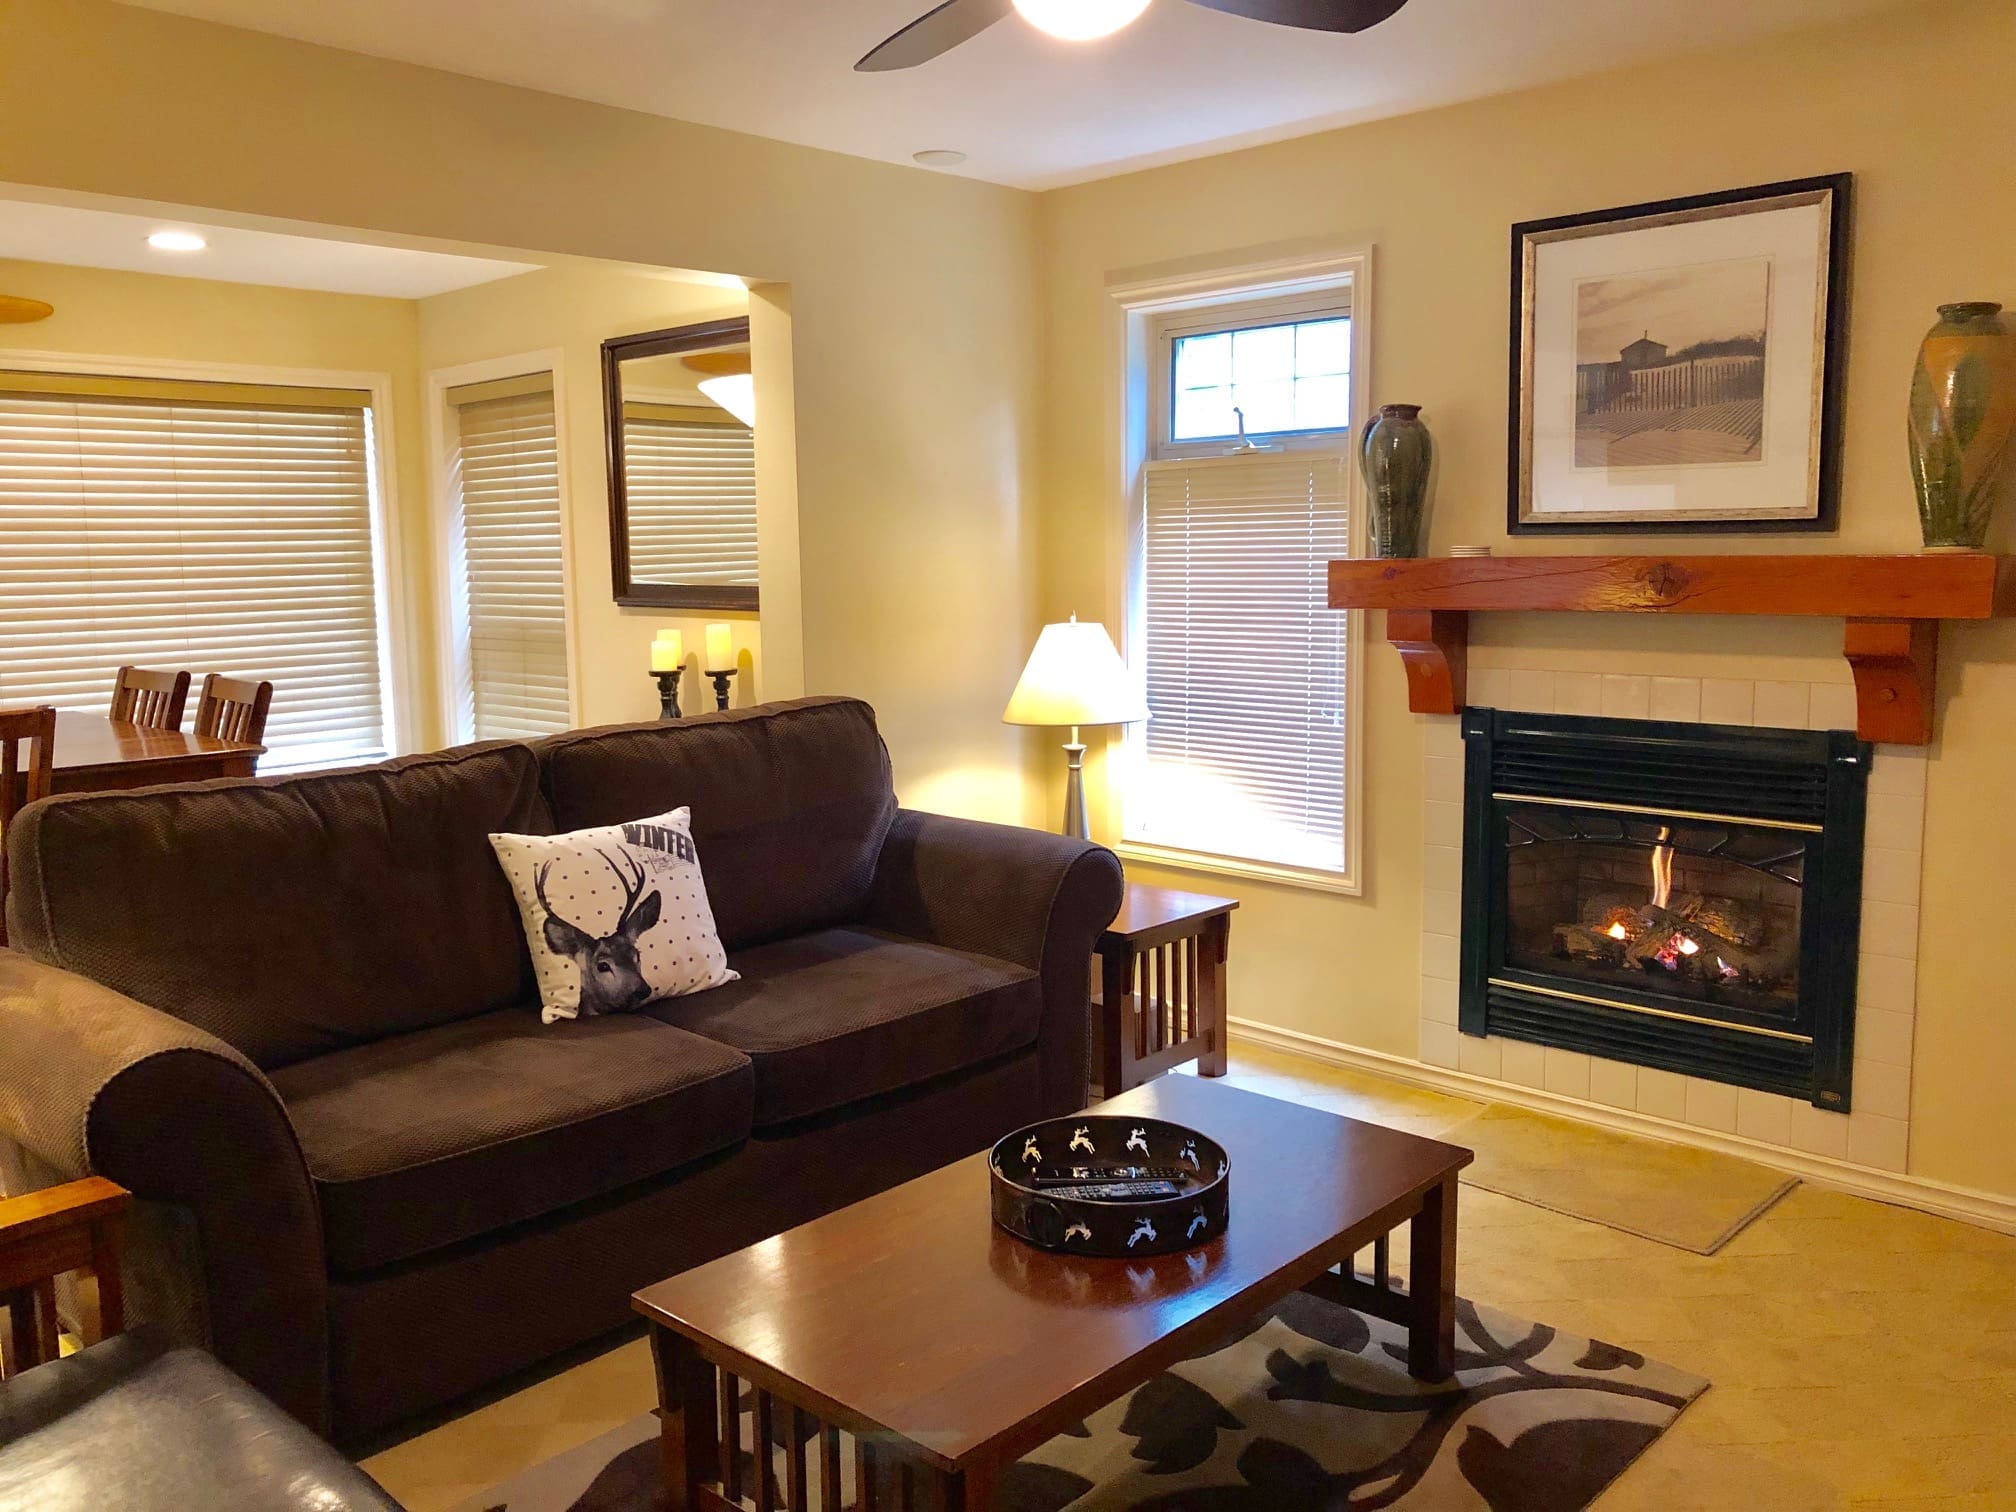 Bright, open suite with private hot tub, laundry, ski locker, BBQ. Living area has a gas fireplace and open concept. It's pet-friendly too and great ski in and out access to trails and lifts.